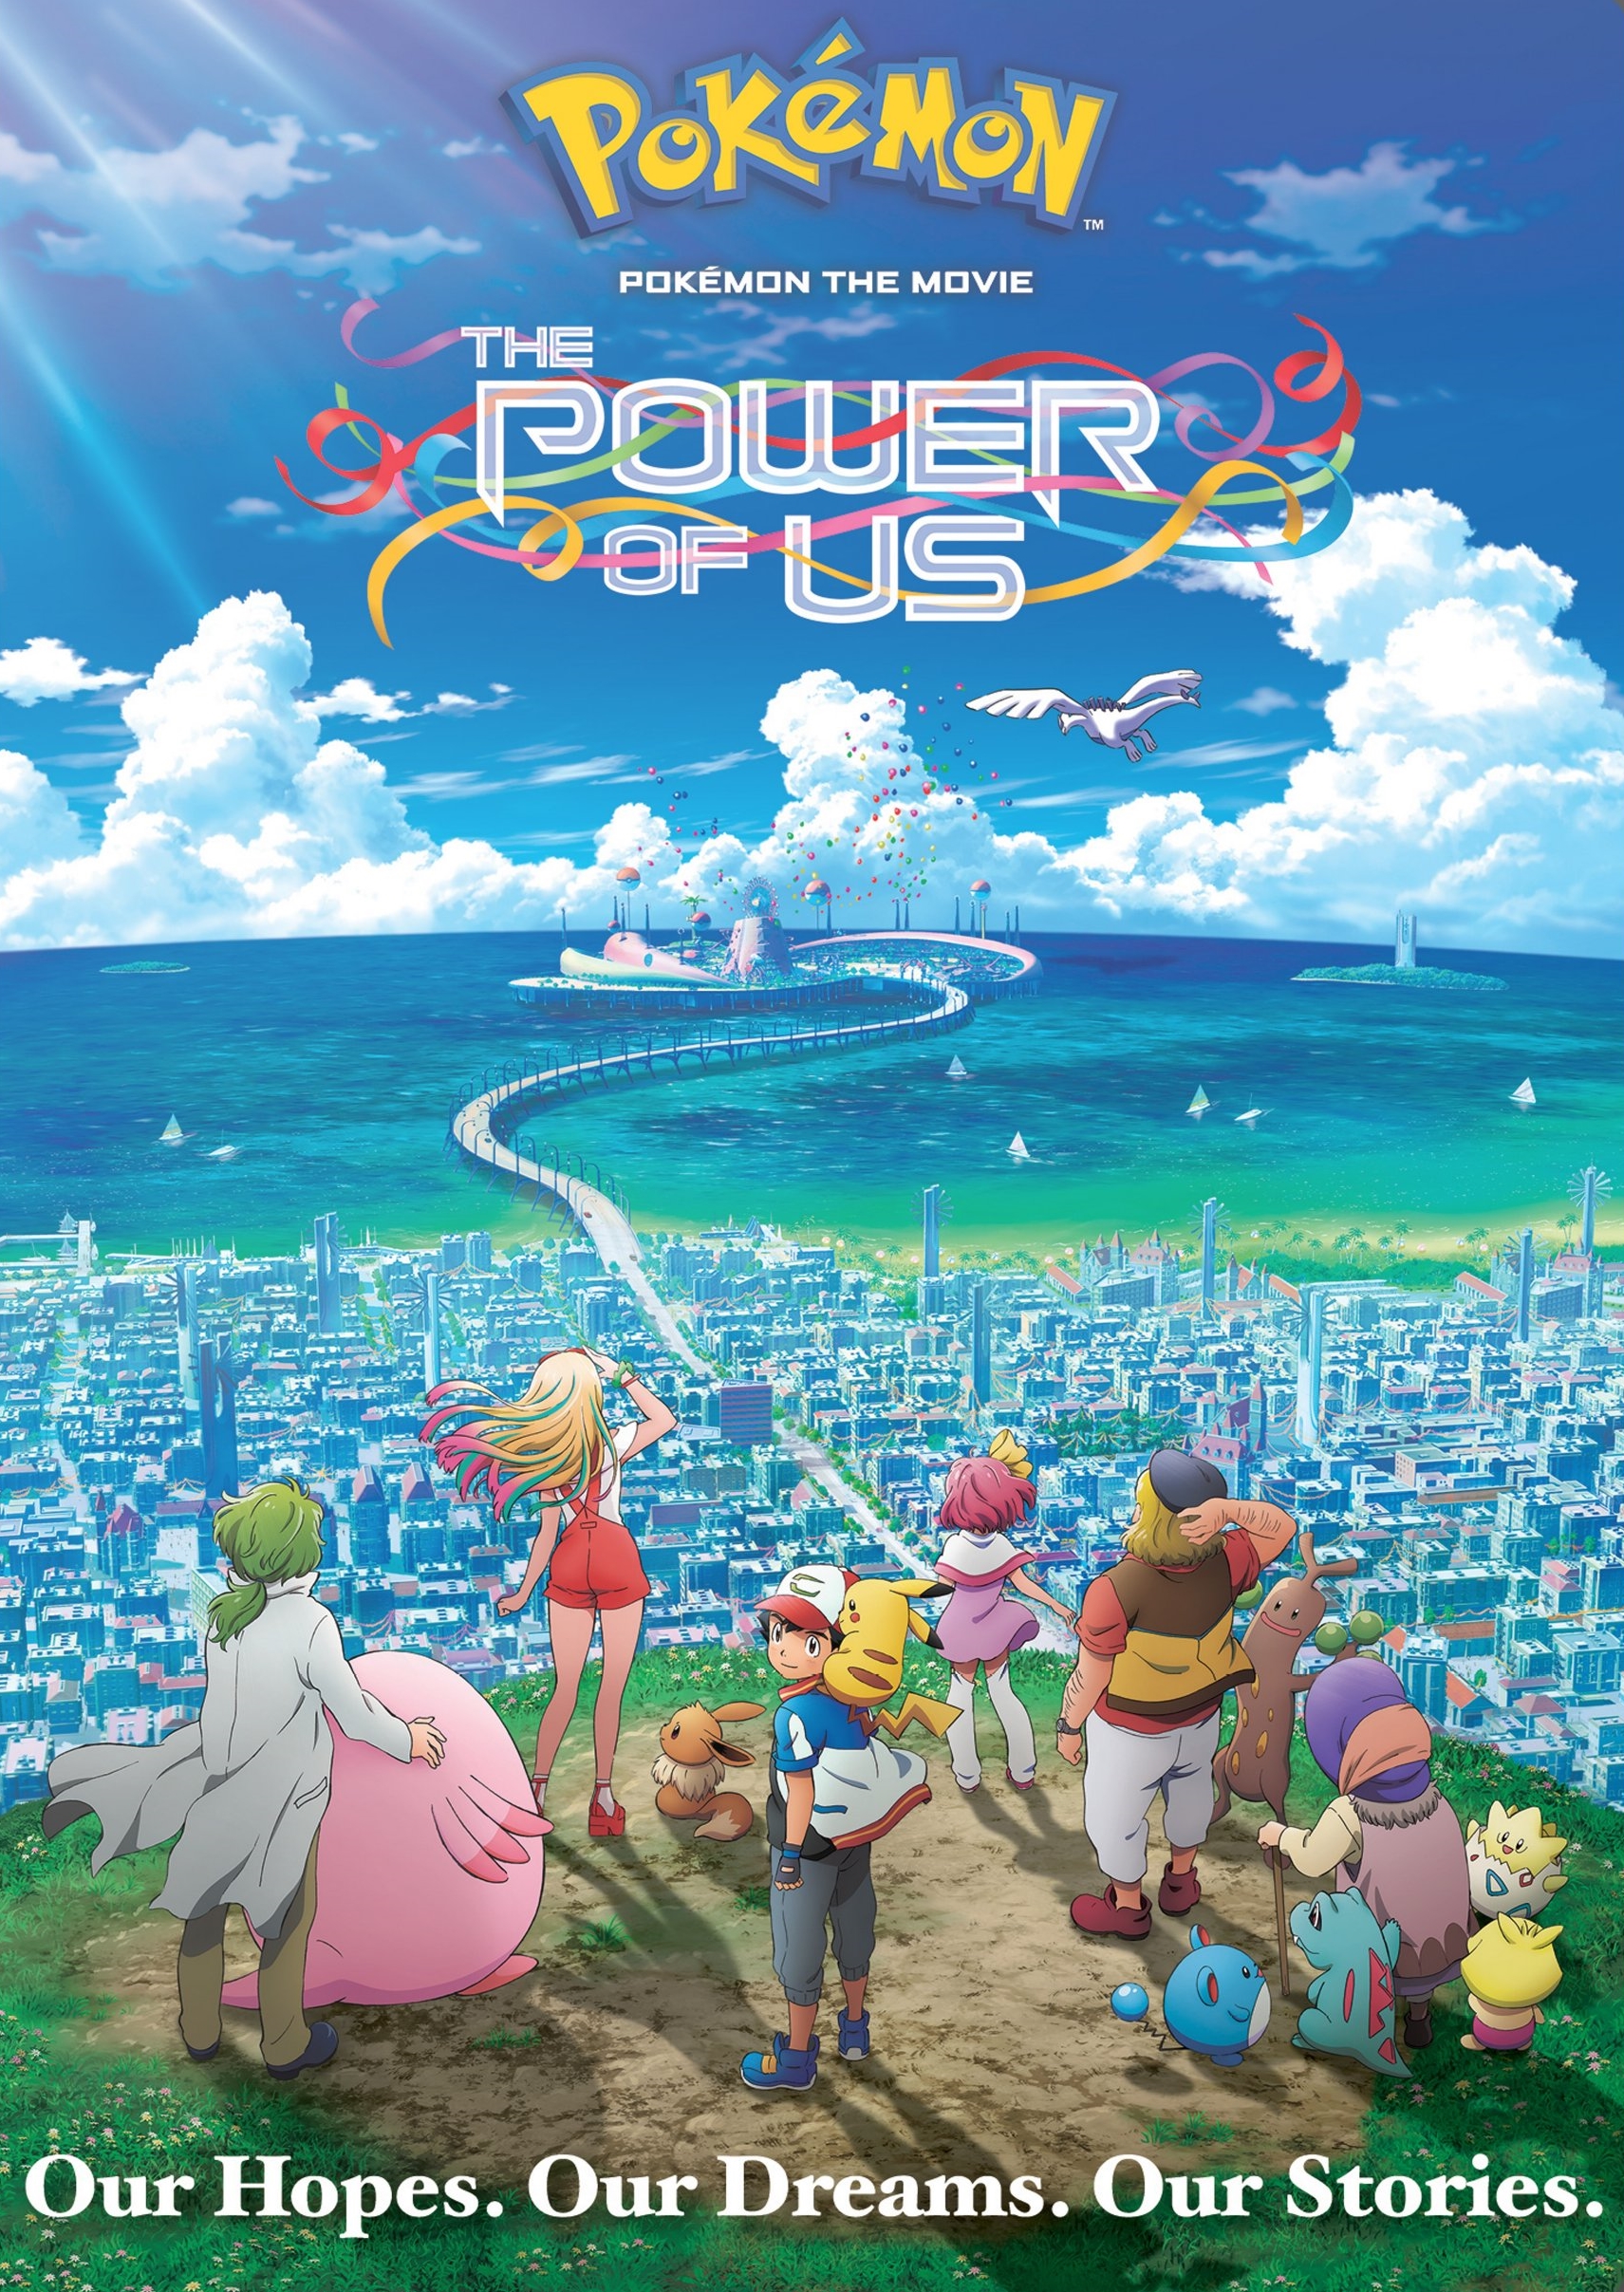 Pokemon the Movie: The Power of Us [DVD] [2018] - Best Buy